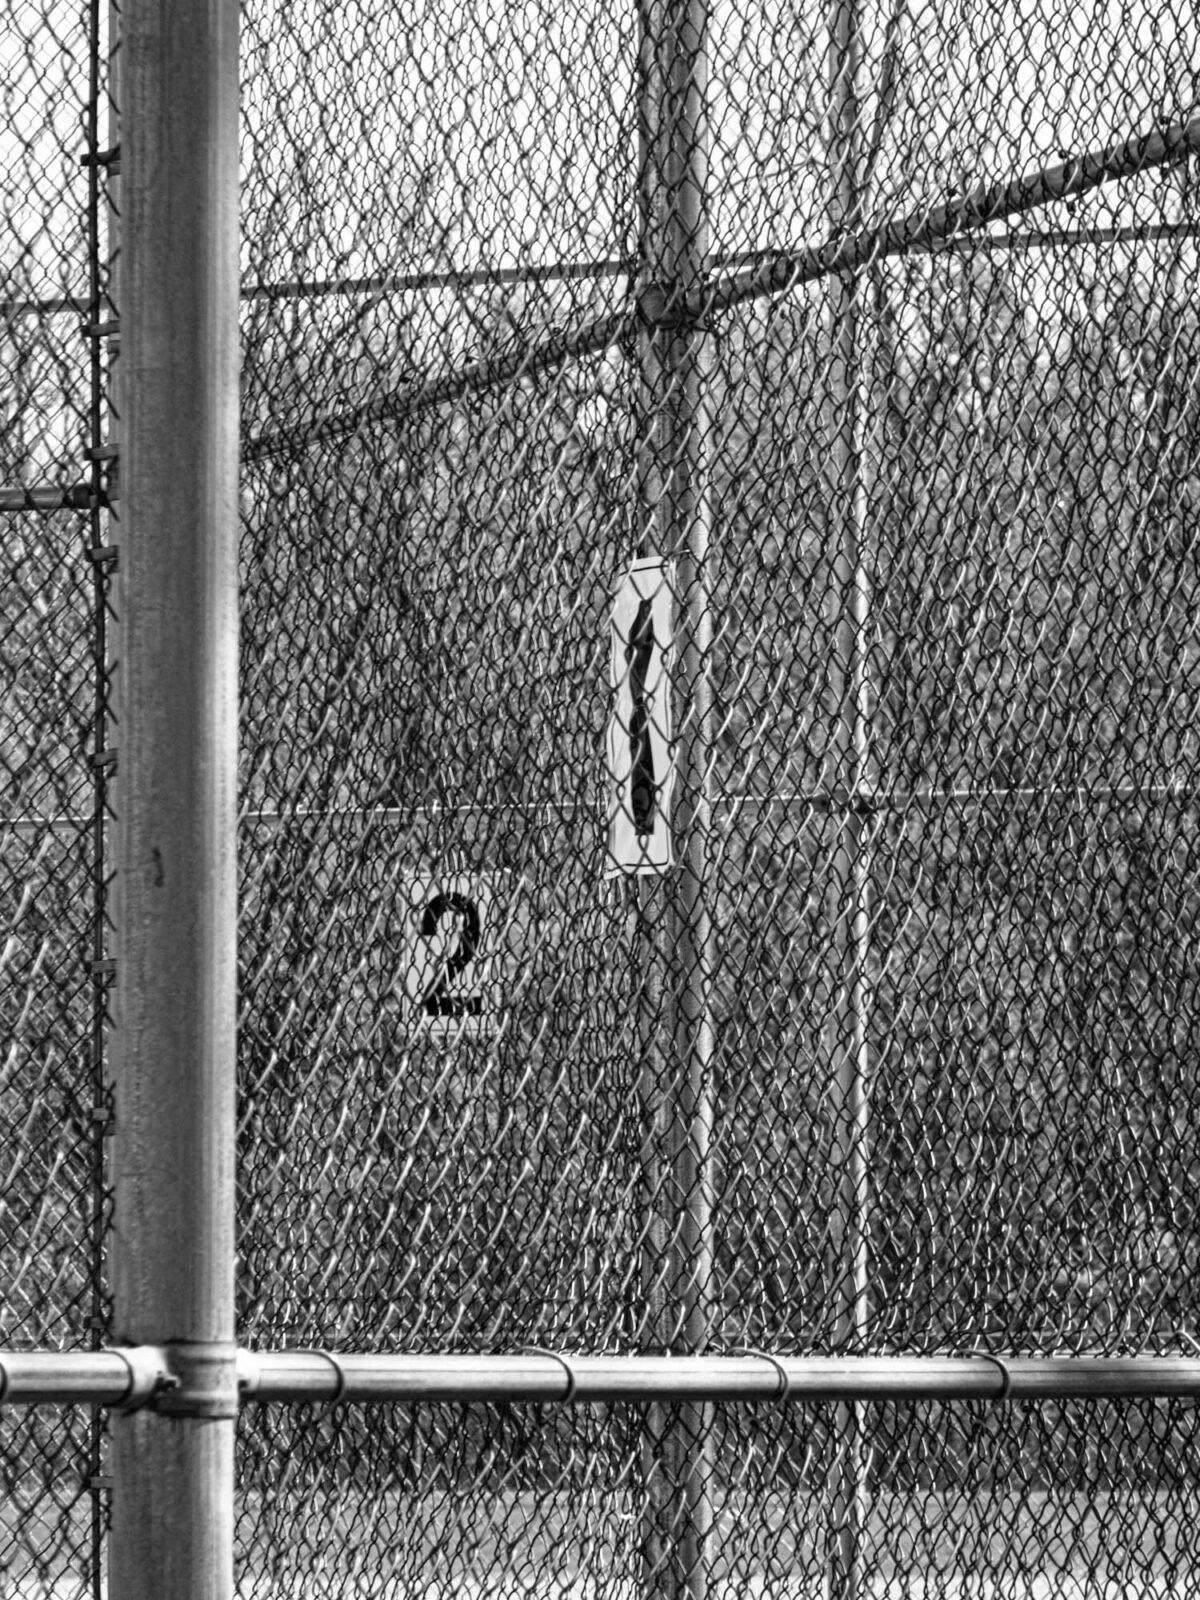 The signs "1" and "2" on chain link fence.